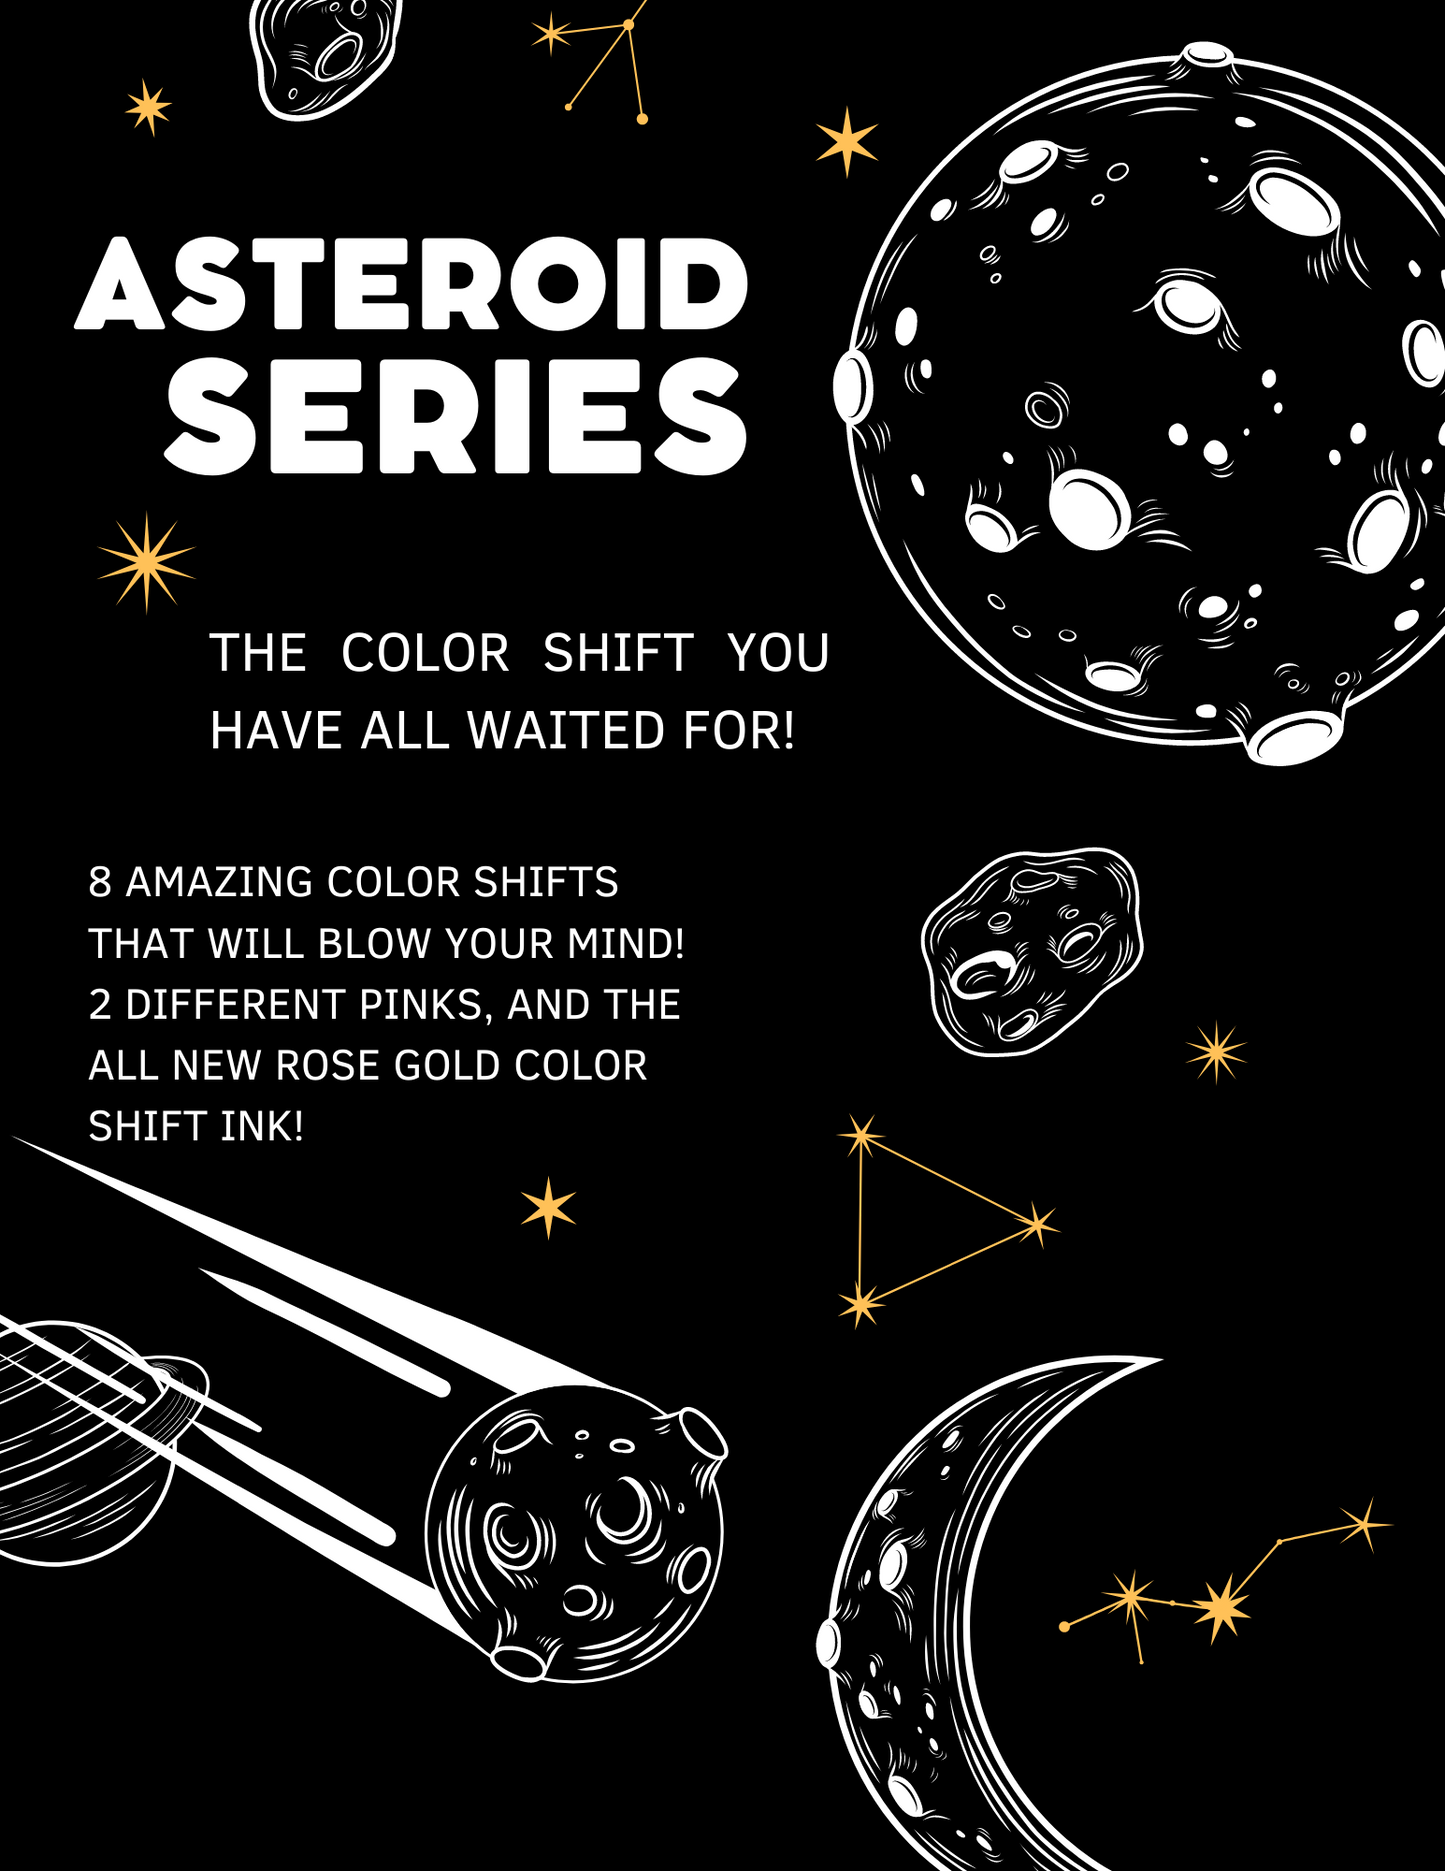 ASTEROID SERIES COLOR SHIFTING INK™ 2.0